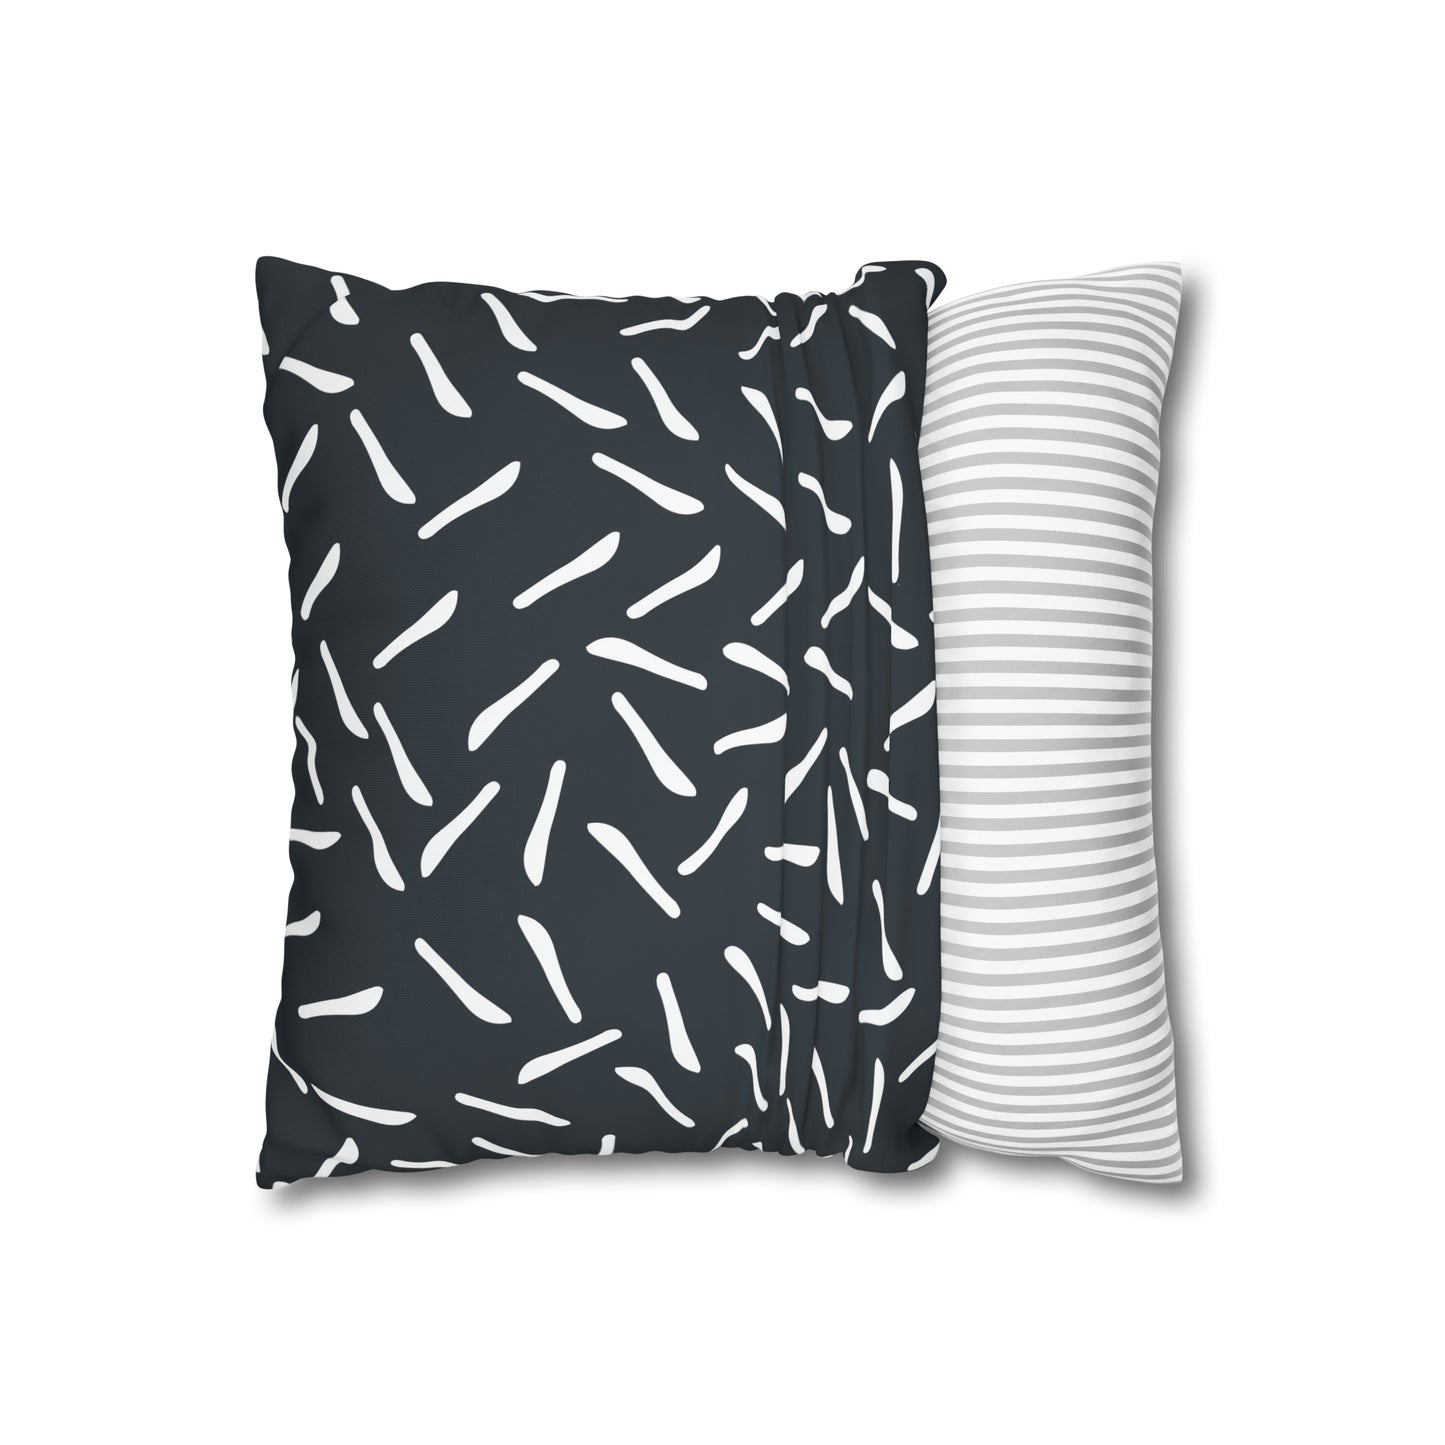 Fleeting Navy white lines Square Poly Canvas Pillowcase